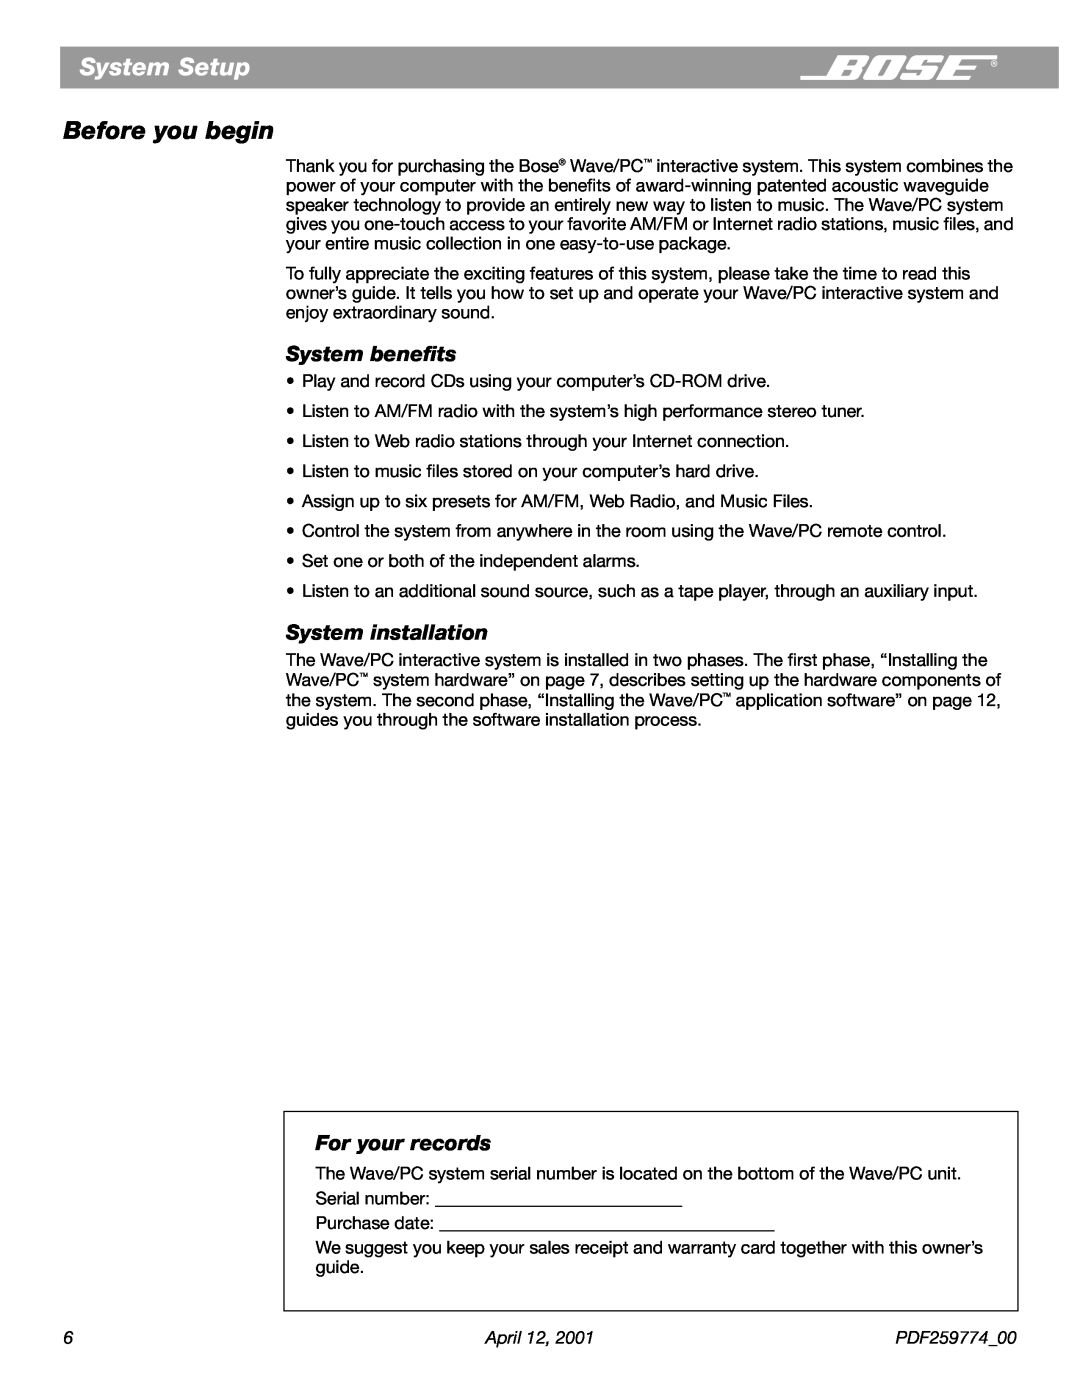 Bose PDF259774_00 manual System Setup, Before you begin, System beneﬁts, System installation, For your records 